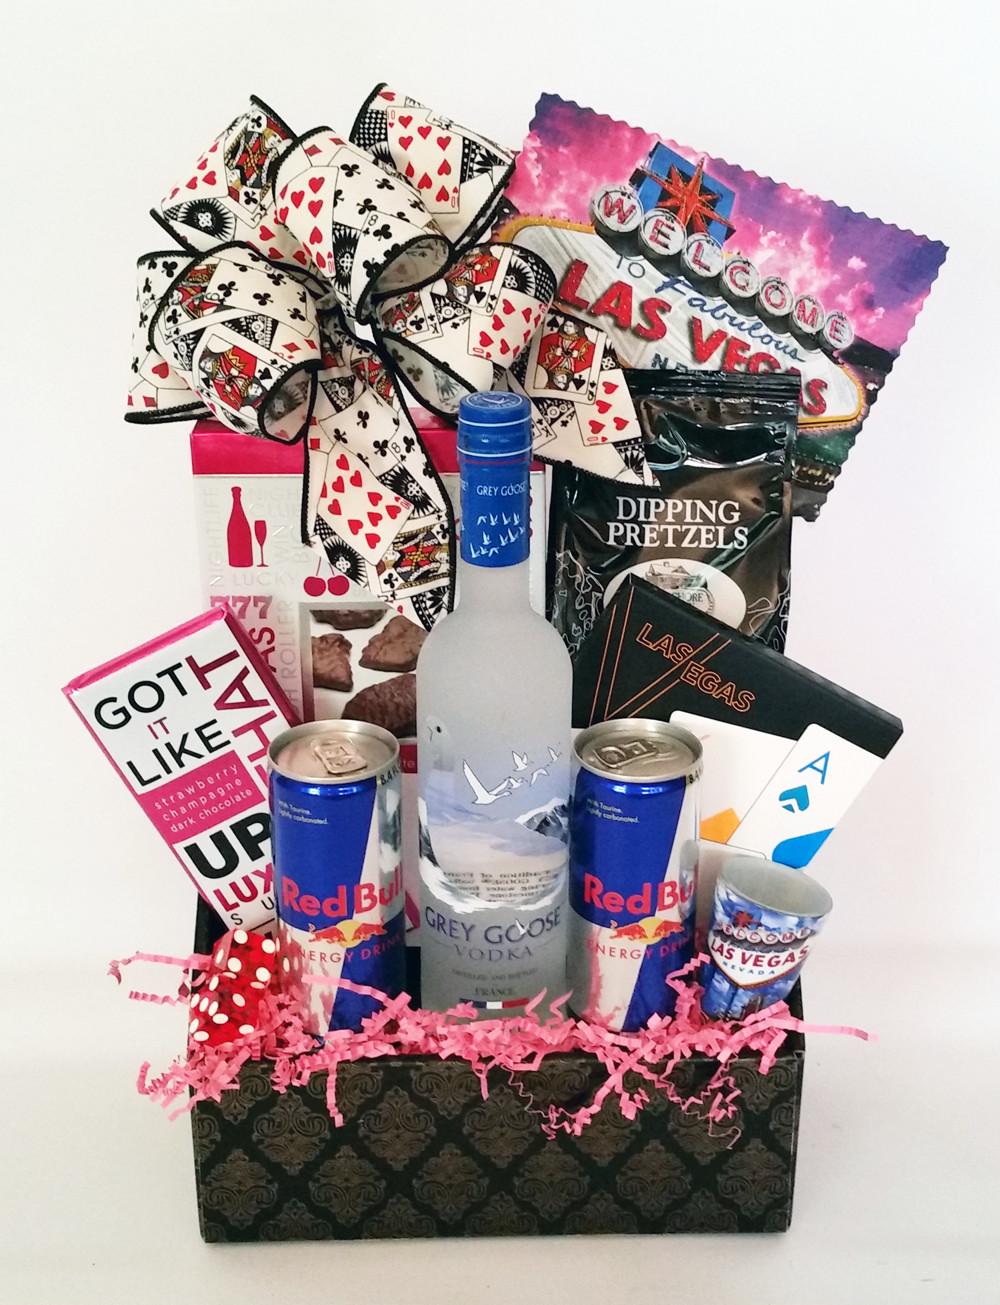 Ladies Night Out Gift Basket Ideas
 Pin on Annie s bachelorette party